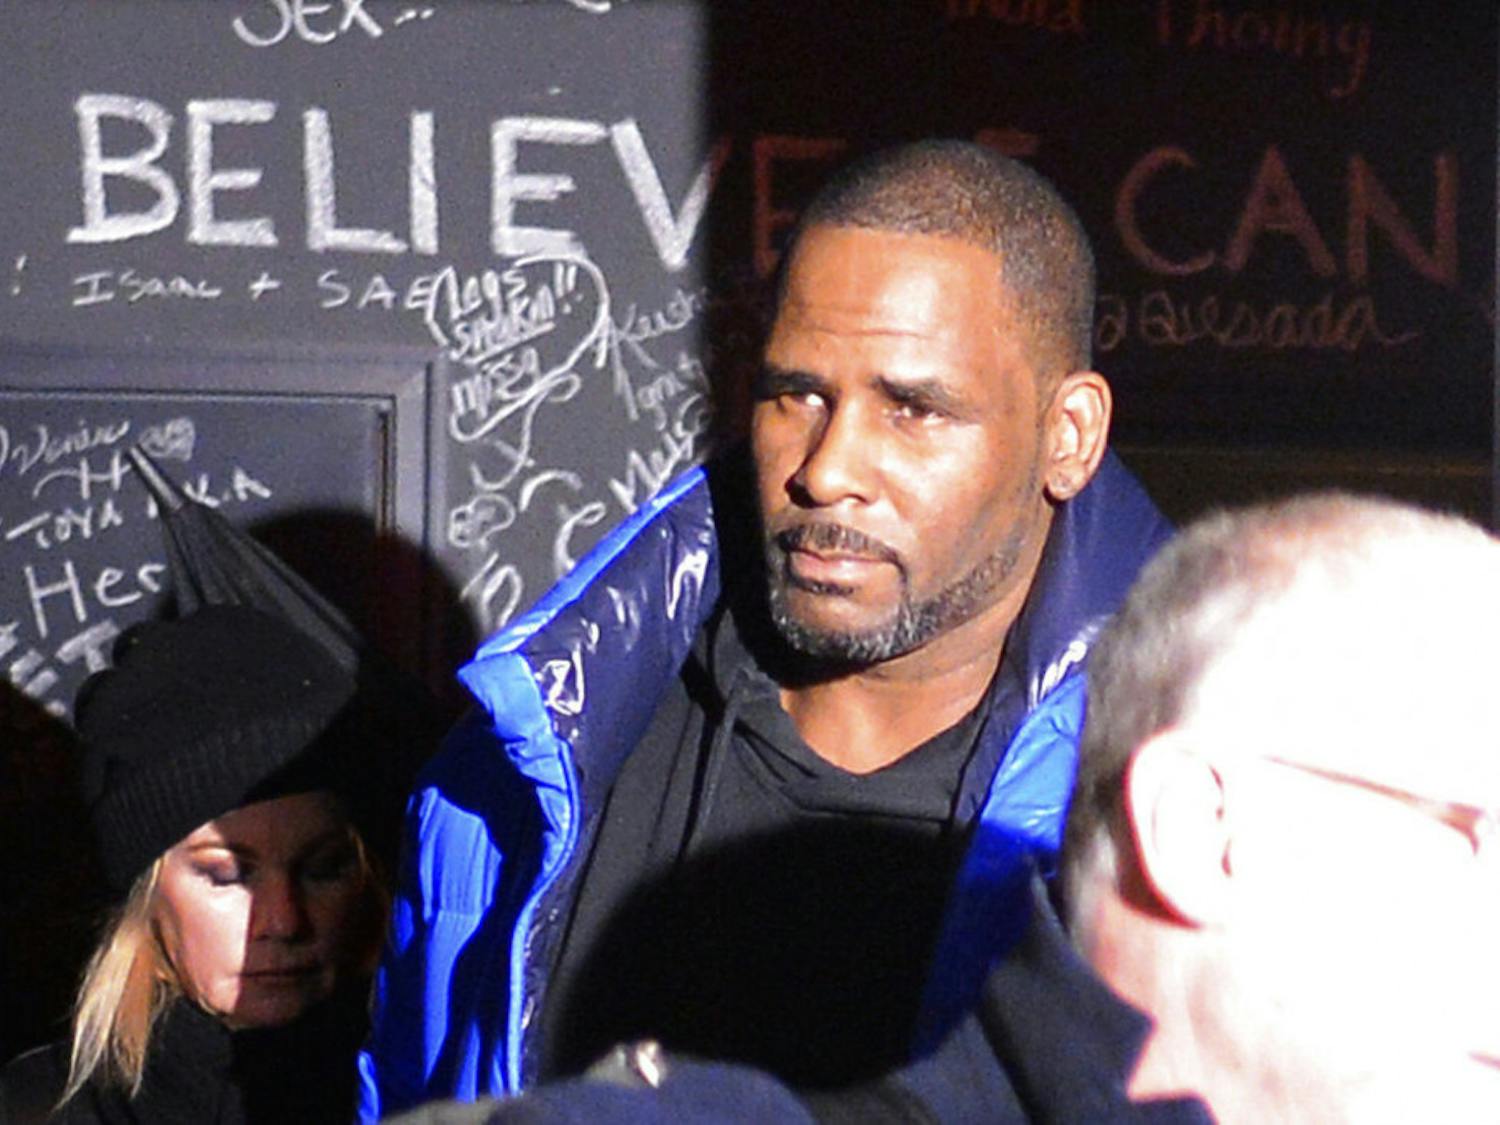 Musician R. Kelly leaves his Chicago studio Friday night, Feb. 22, 2019, on his way to surrender to police. R&amp;B star Kelly was taken into custody after arriving Friday night at a Chicago police precinct, hours after authorities announced multiple charges of aggravated sexual abuse involving four victims, including at least three between the ages of 13 and 17. (Victor Hilitski/Chicago Sun-Times via AP)